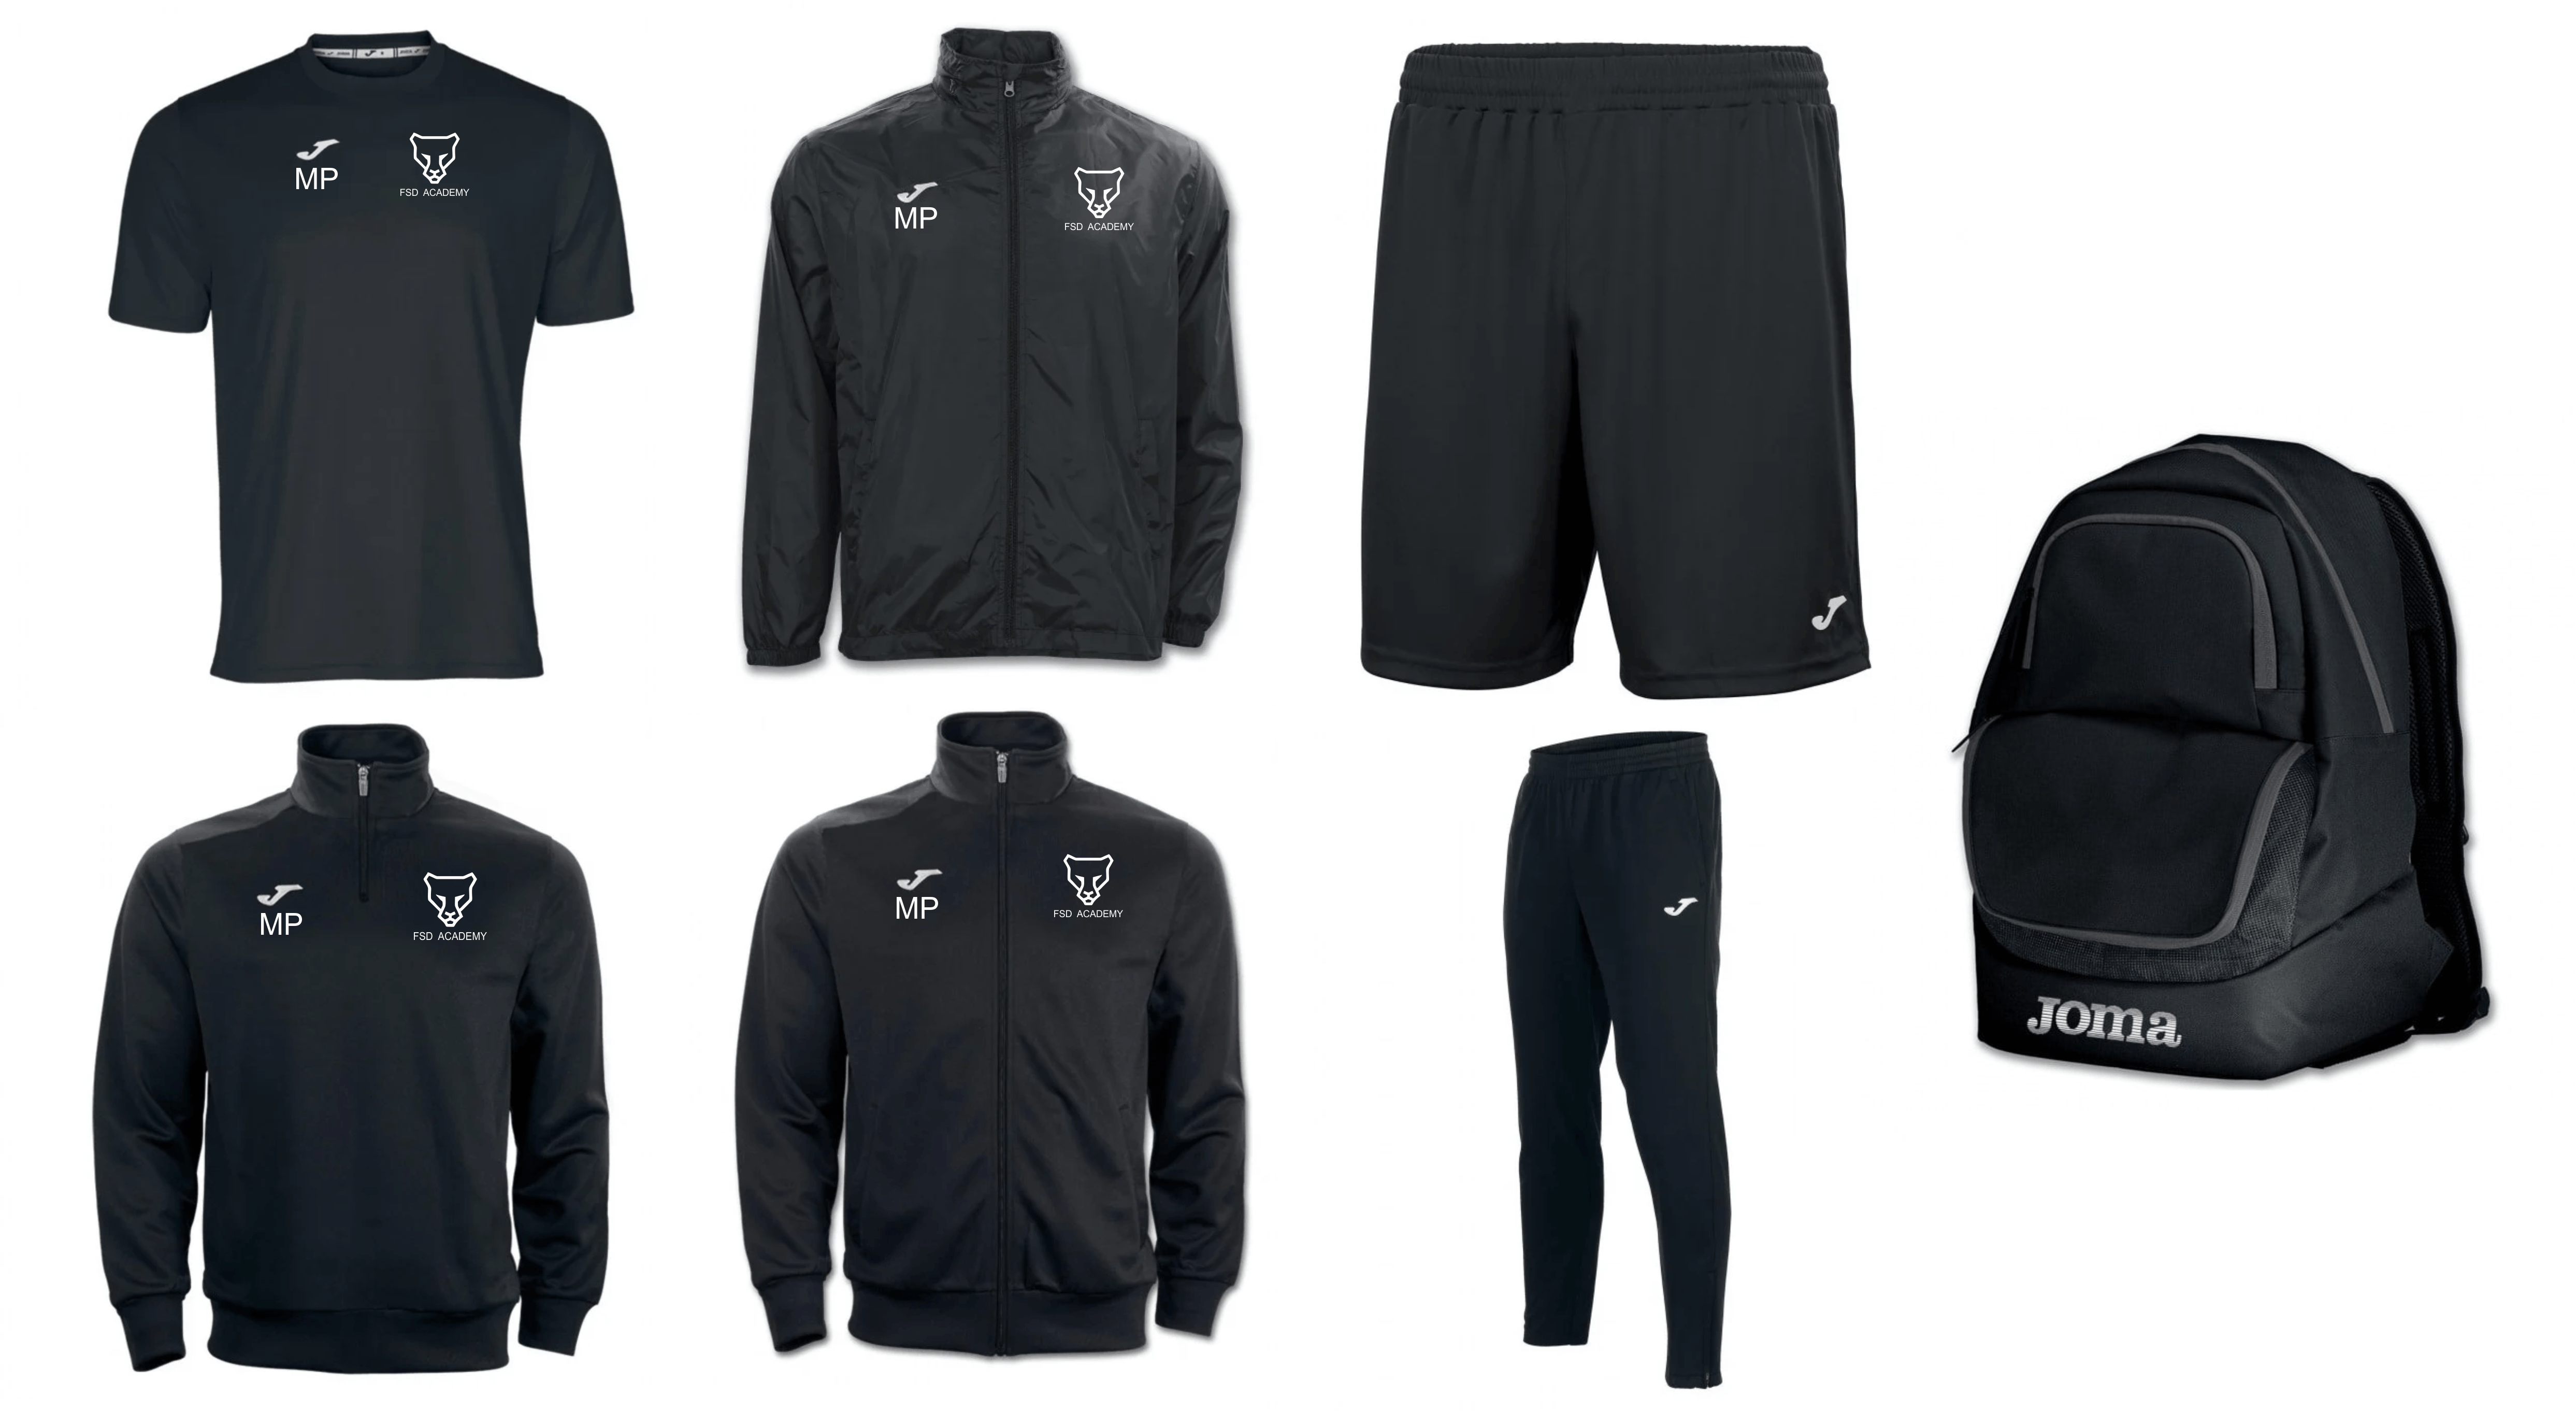 FSD Academy 2022/23 collection 2. (£60 deposit now, £60 payment later for item to be shipped)